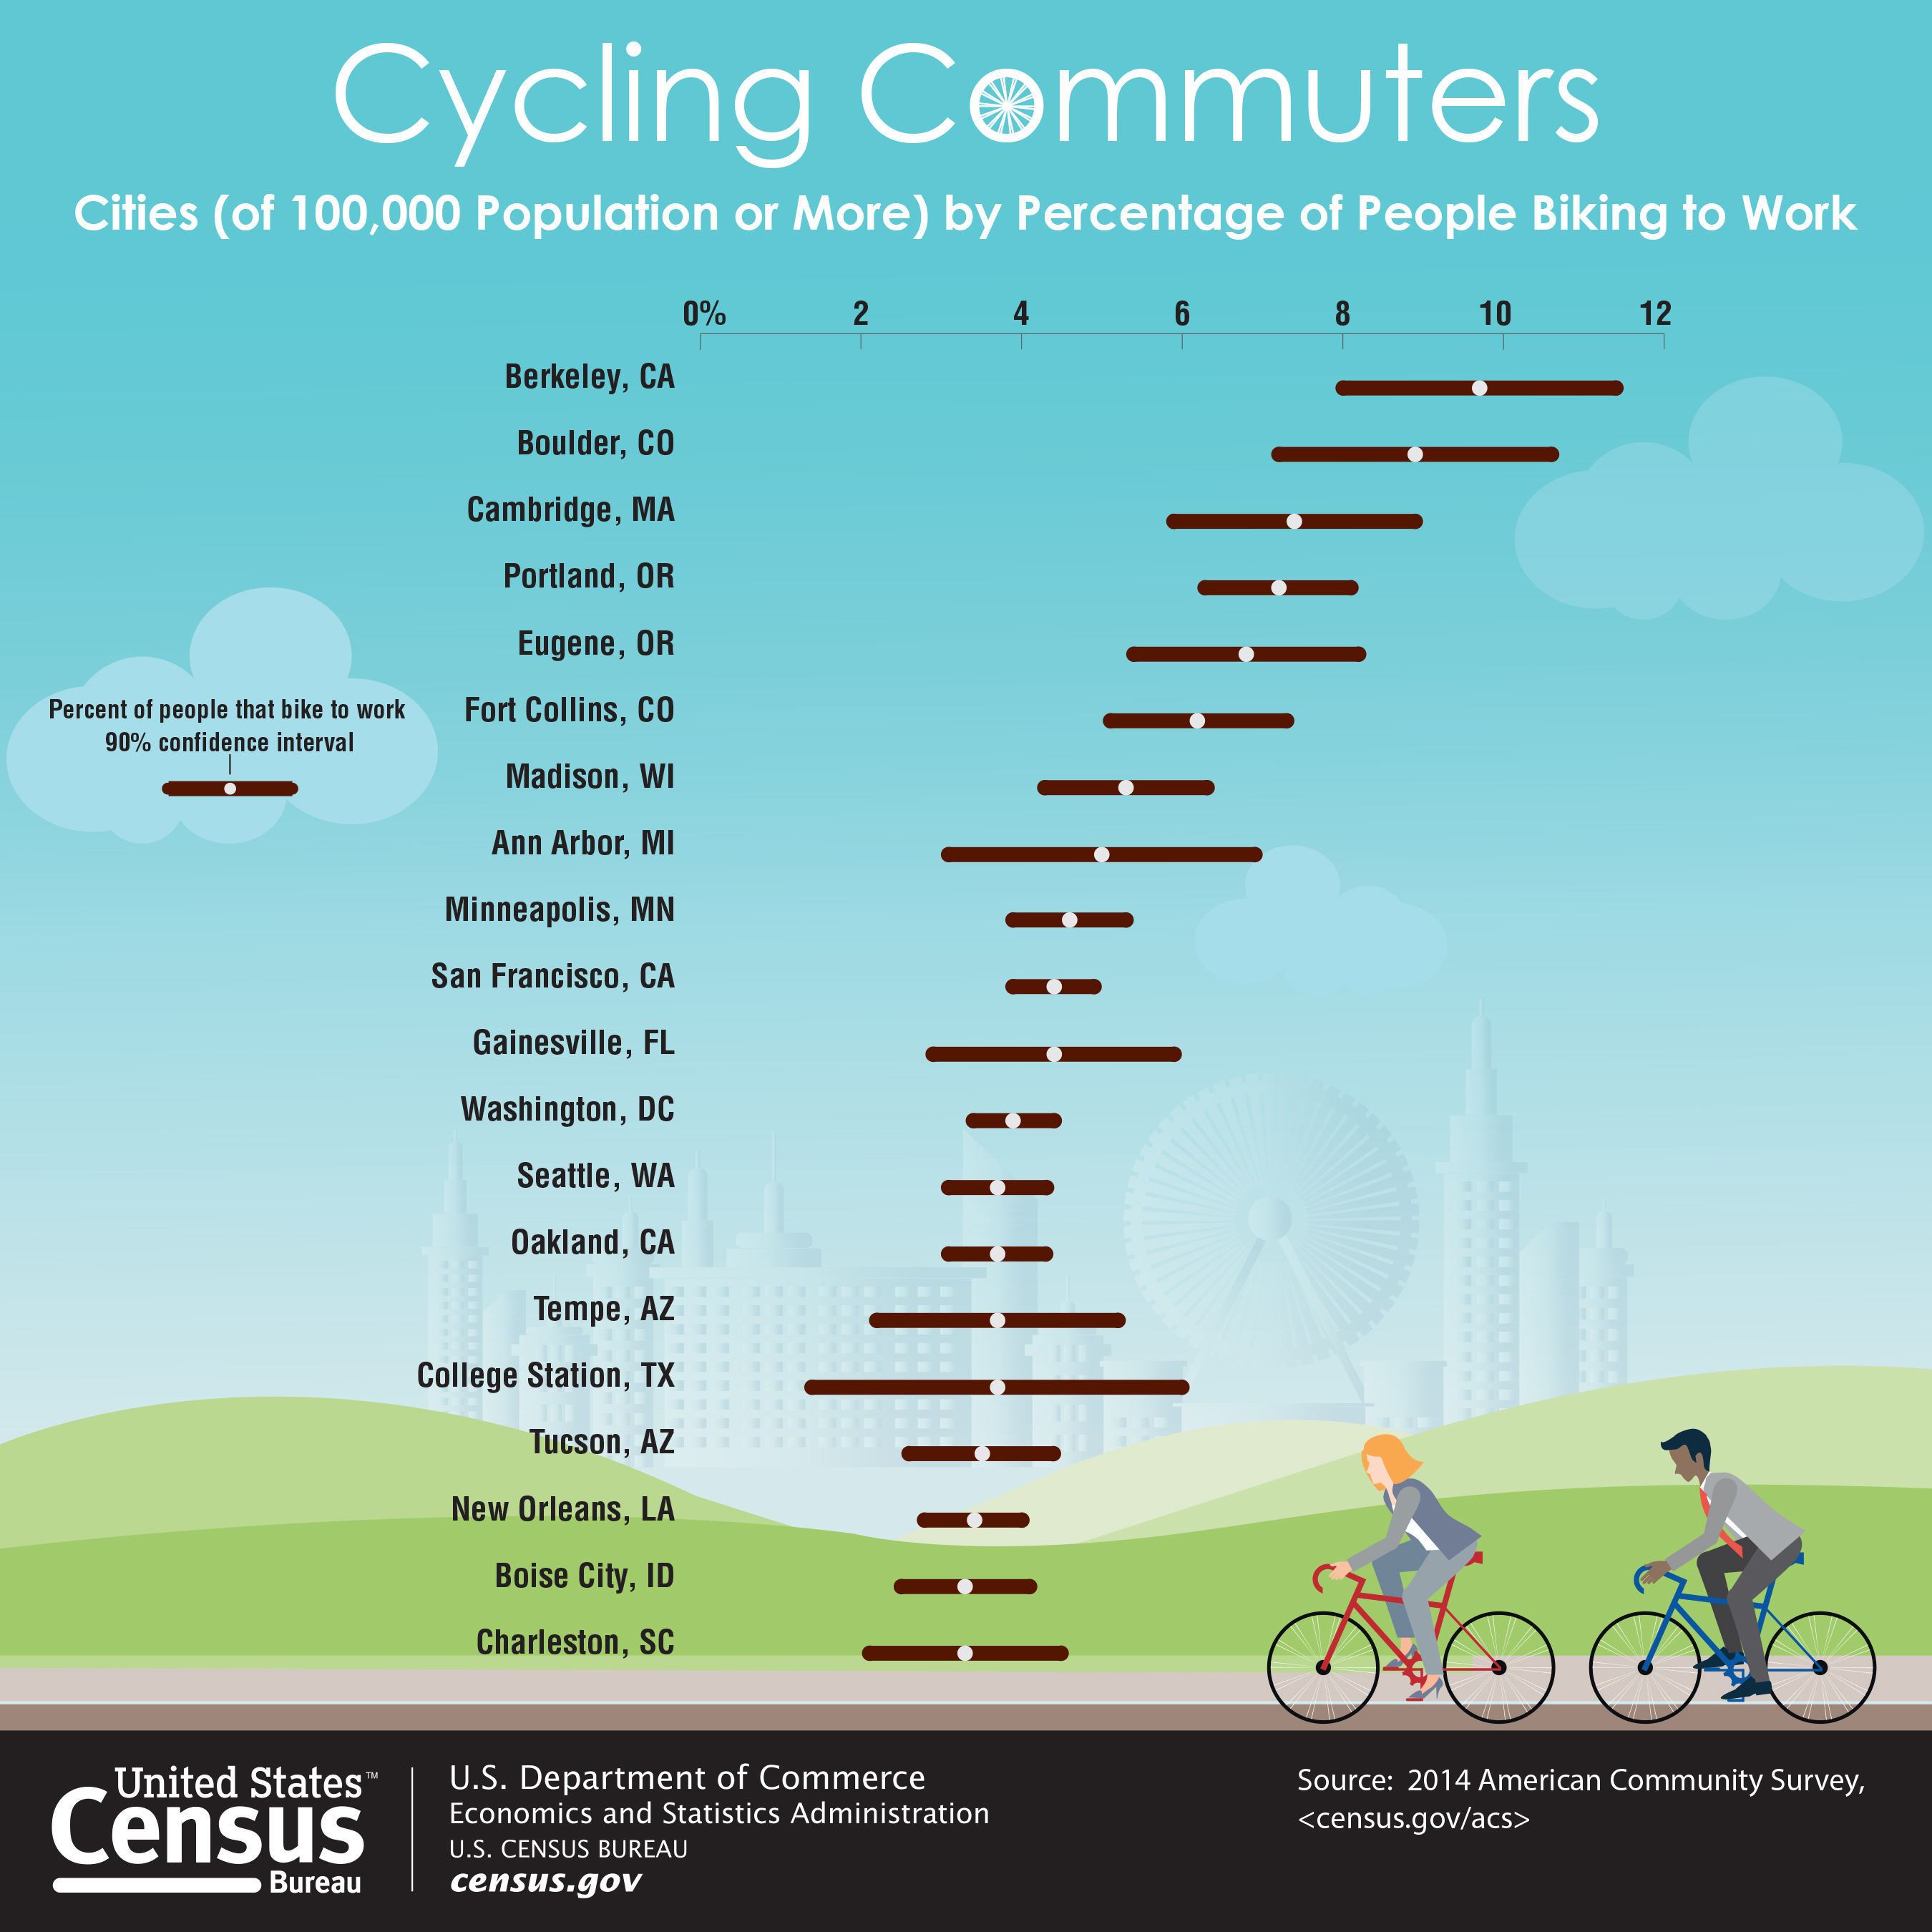 Chart showing the percentage of residents commuting to work by bike for US cities with population greater than 100,000 people.